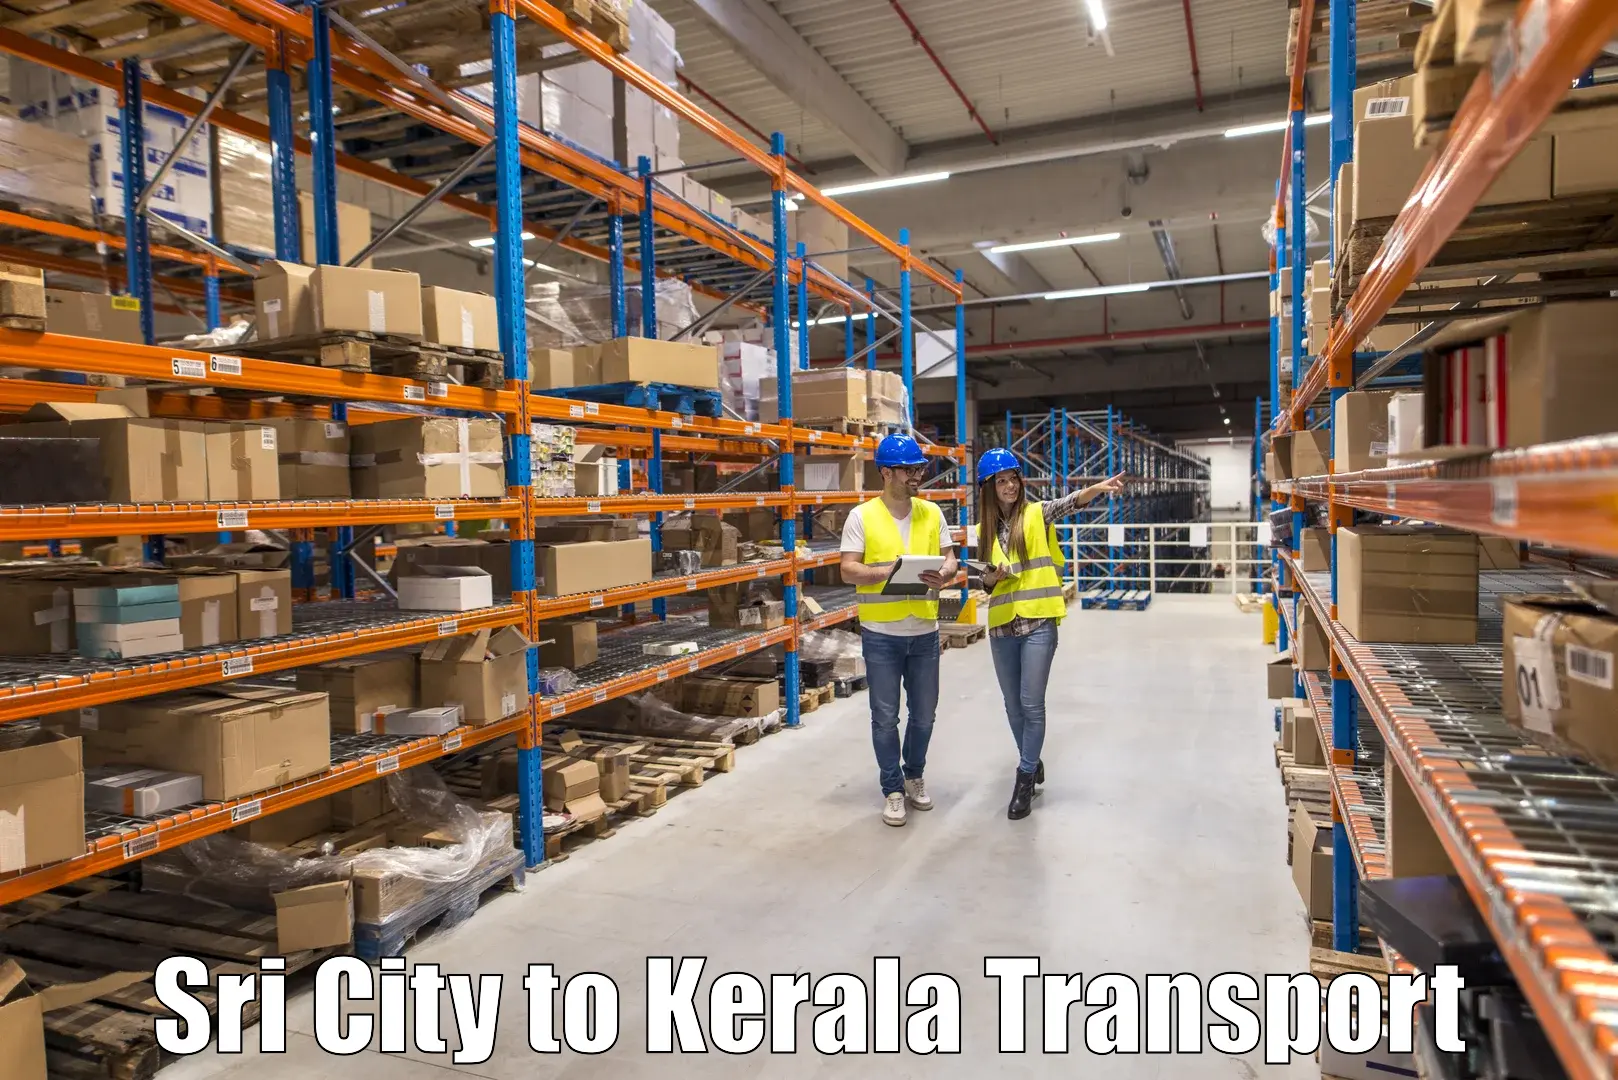 Transport bike from one state to another Sri City to Alathur Malabar